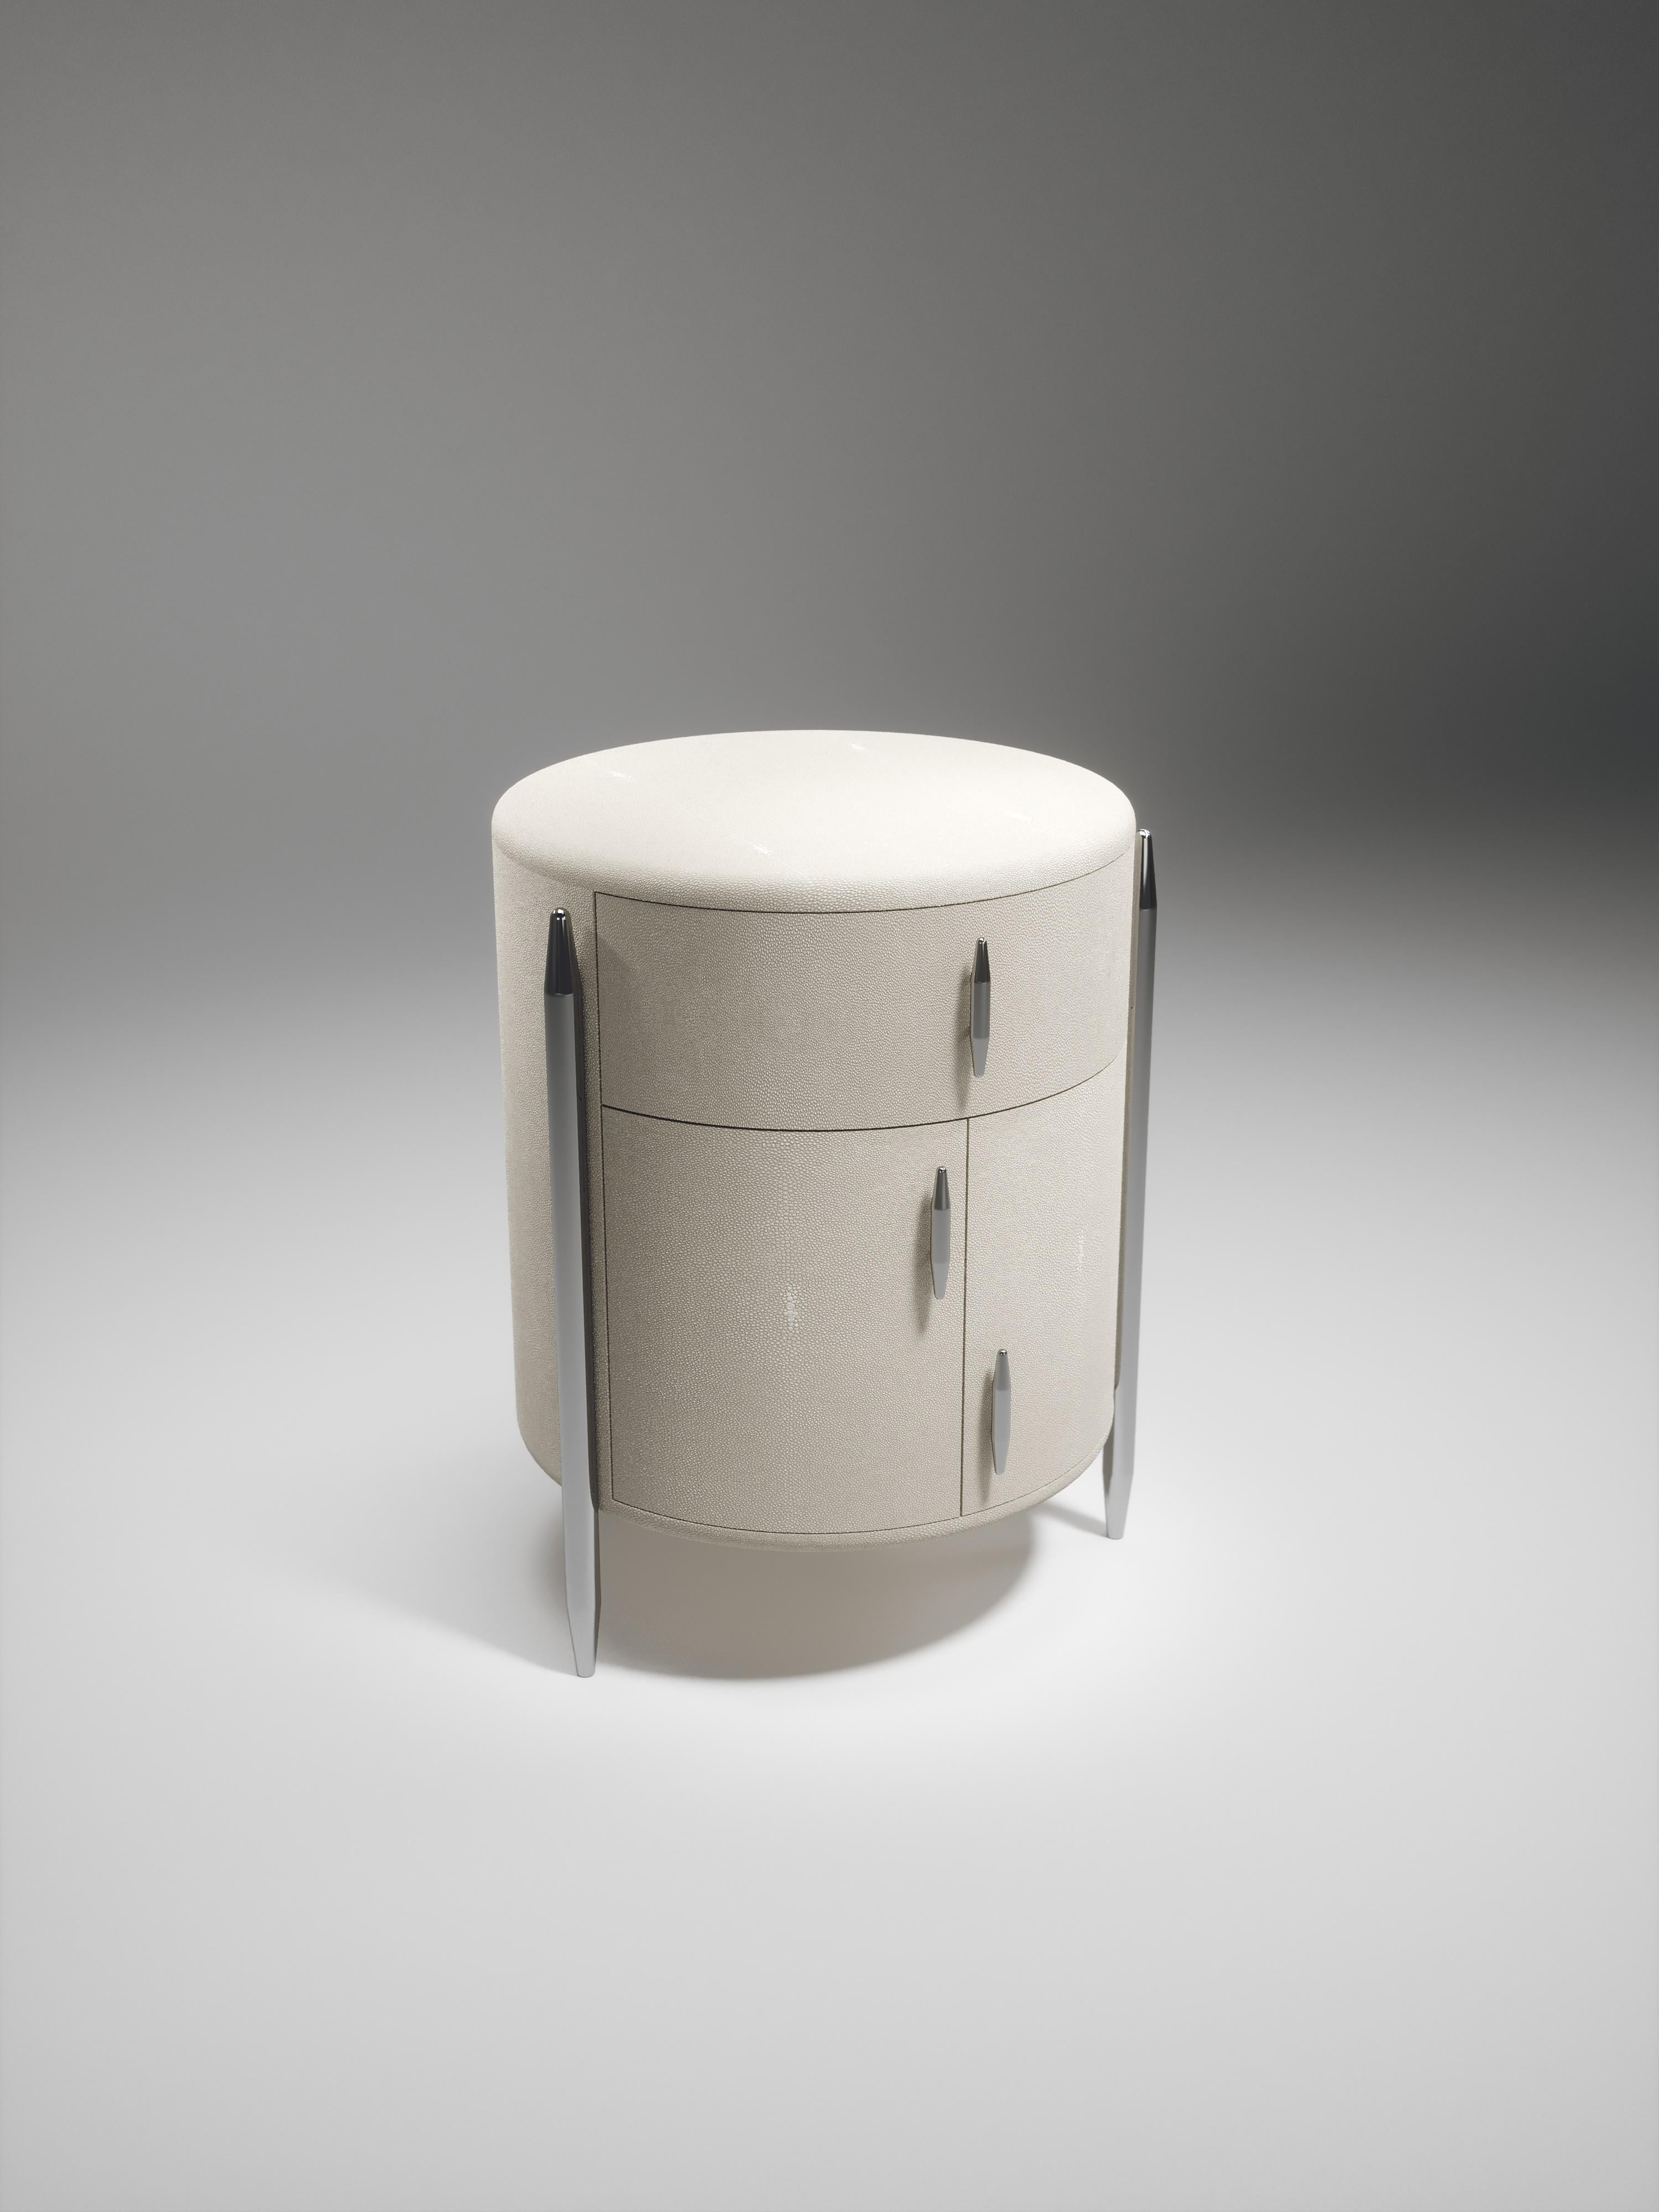 The Dandy round bedside table by Kifu Paris is an elegant and a luxurious home accent, inlaid in cream shagreen with polished stainless steel details. This piece includes 1 drawer total and a cabinet below; the interiors are inlaid in gemelina wood